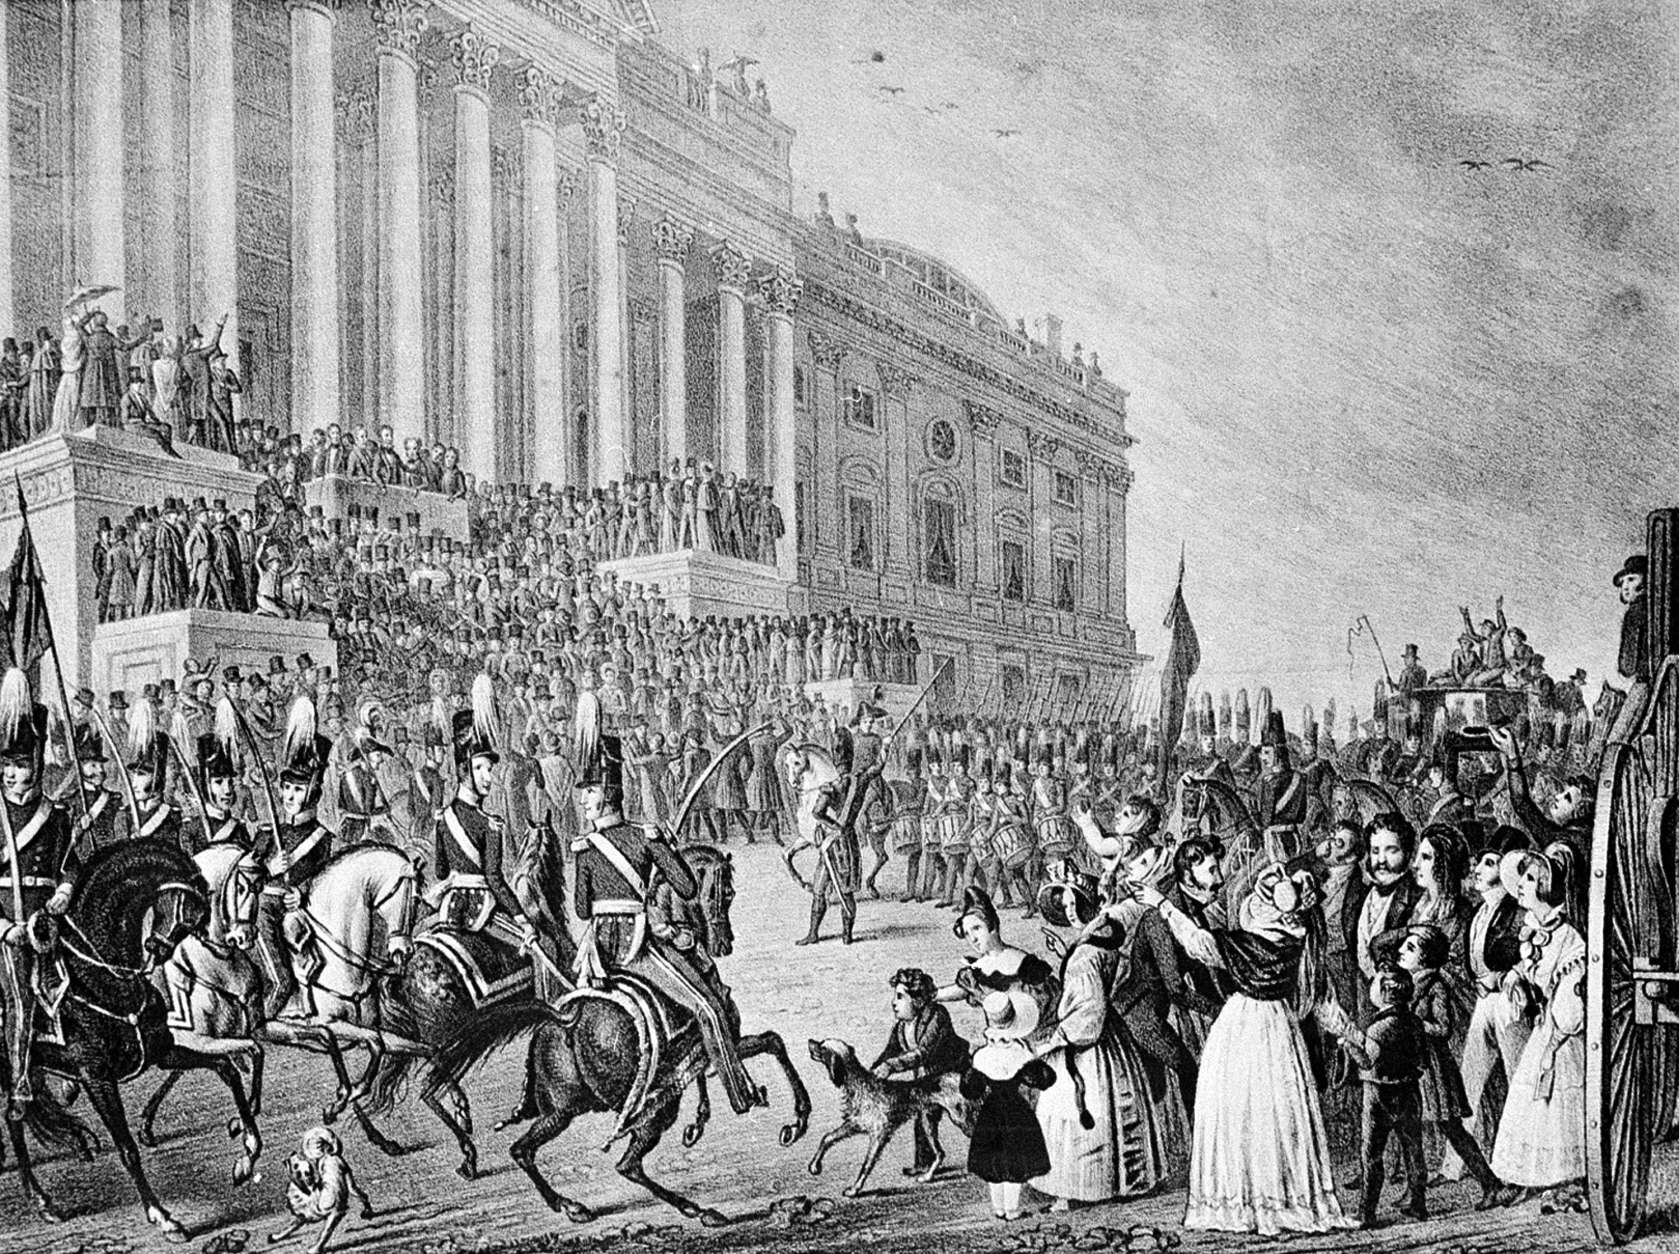 This is an artist's impression of President William Henry Harrison's inauguration in Washington, D.C., on March 4, 1841.  Harrison declined the offer of a closed carriage and rode on horseback to the Capitol, braving cold temperatures and a northeast wind. After speaking for more than an hour, he returned to the White House on horseback, catching a chill that eventually turned to pneumonia. He died a month later.  (AP Photo)